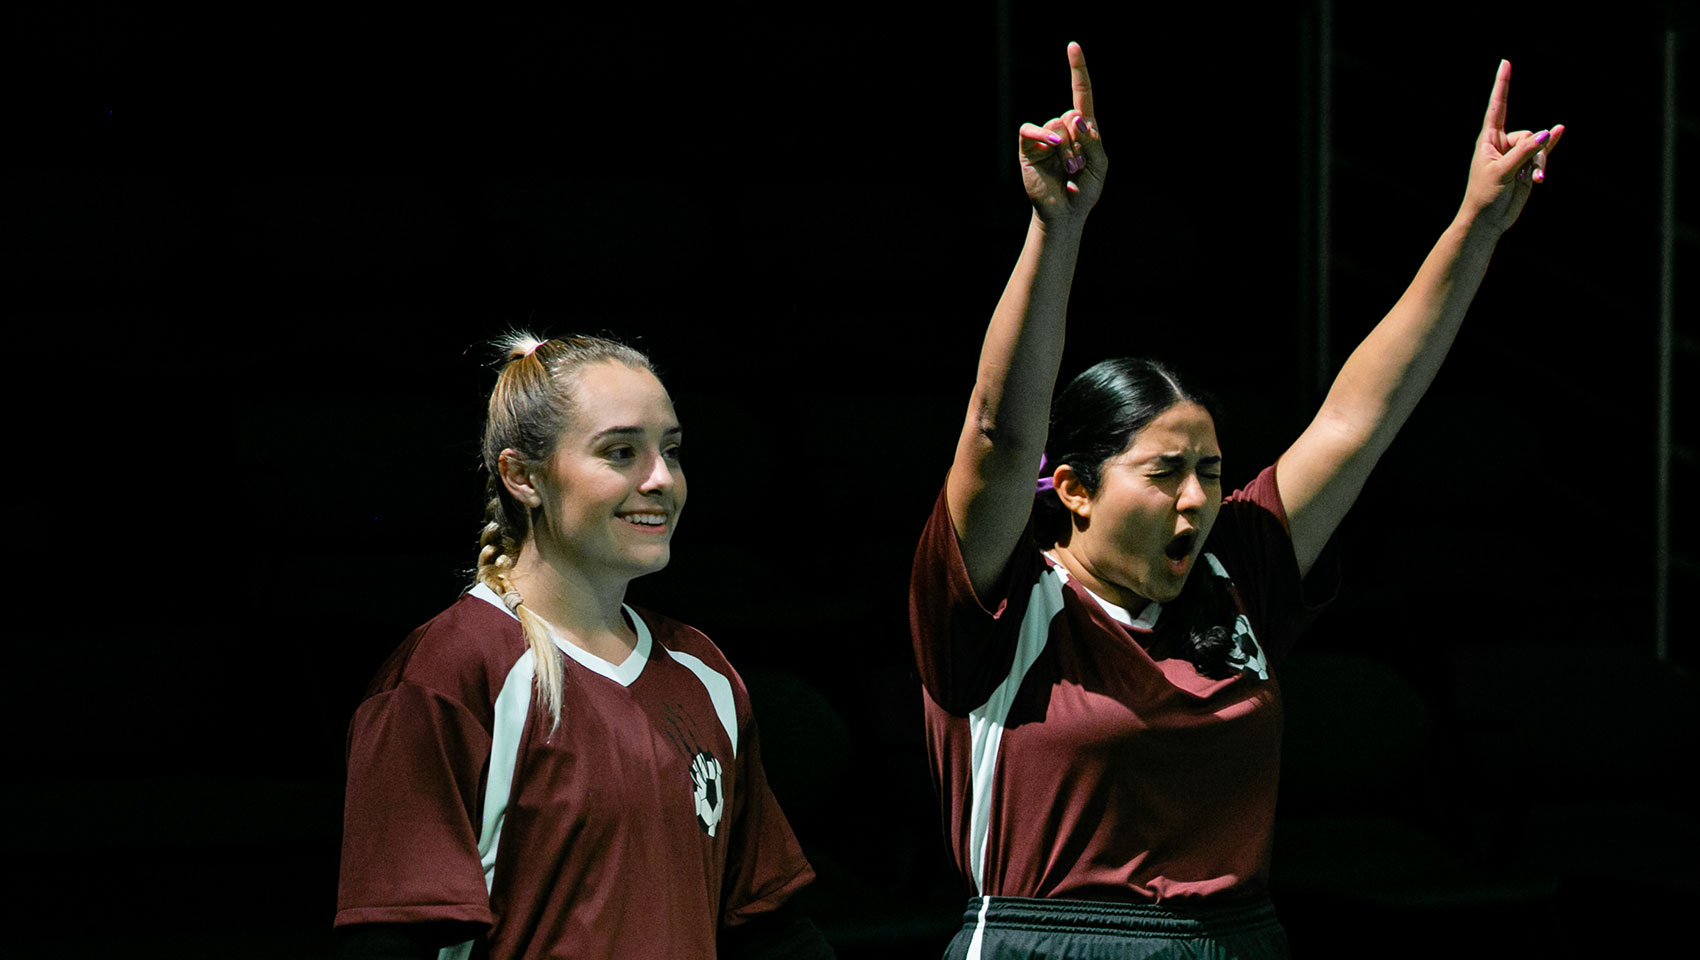 Two women's soccer teammates stand near each other, one cheering as she raises both arms upwards in victory signs, the other smiling as she looks on whatever is happening before them. 